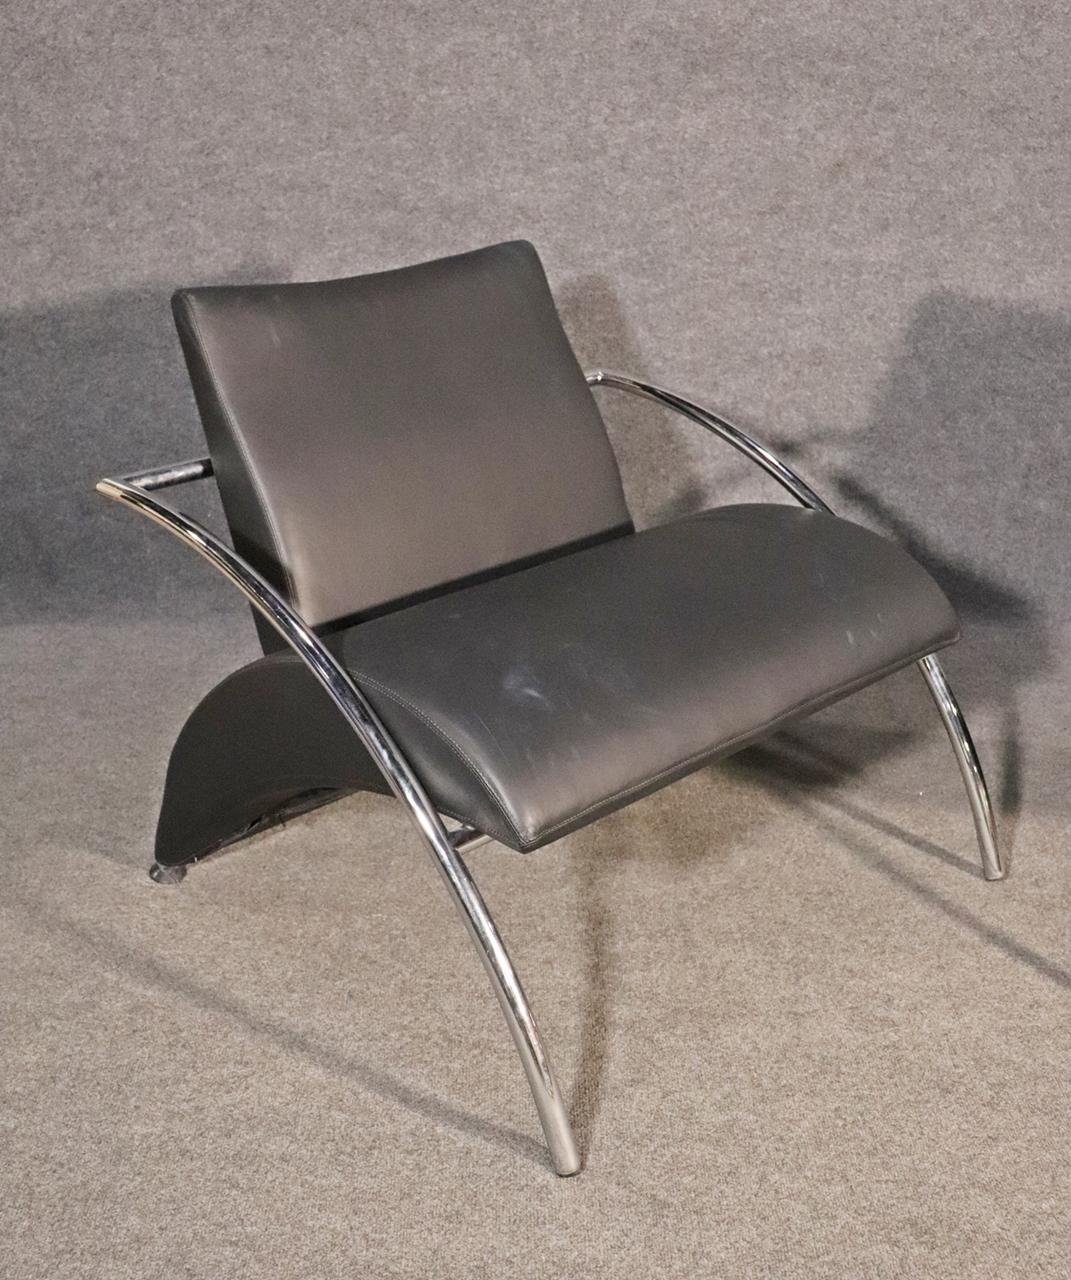 Late 20th Century Divano Naiadi Attributed Leather and Chrome Mid-Century Modern Lounge Chairs